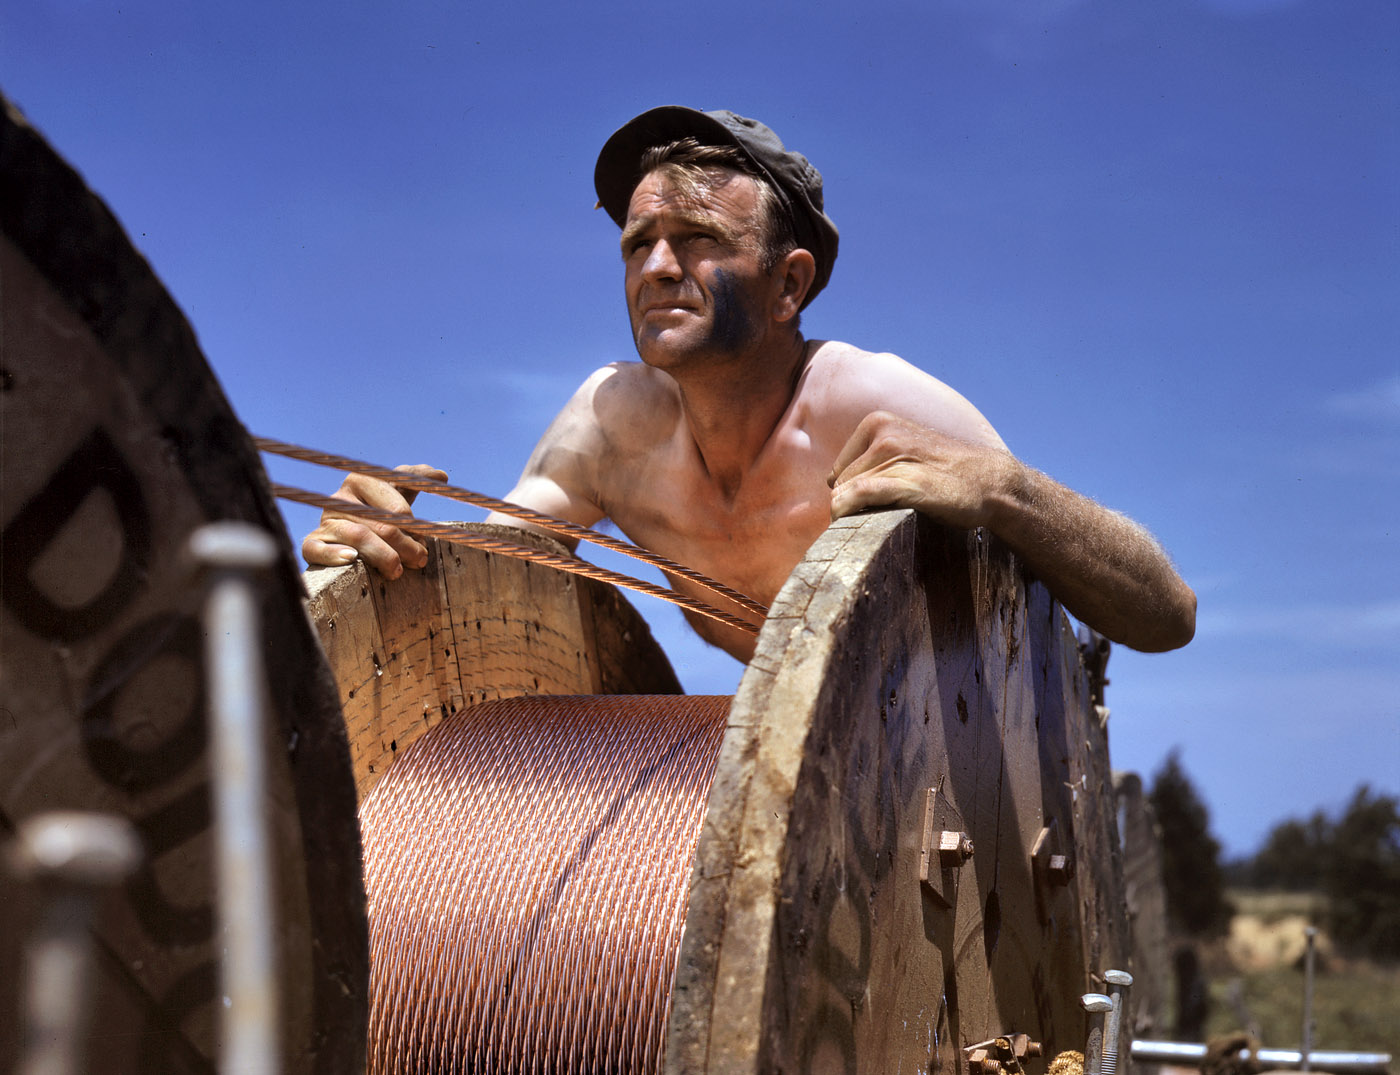 June 1942. "This husky member of a construction crew building a 33,000 volt power line into Fort Knox is performing an important war service. Thousands of soldiers are in training there, and the new line from a hydroelectric plant at Louisville is needed to supplement the existing power supply." 4x5 Kodachrome transparency by Alfred Palmer, Office of War Information. View full size.